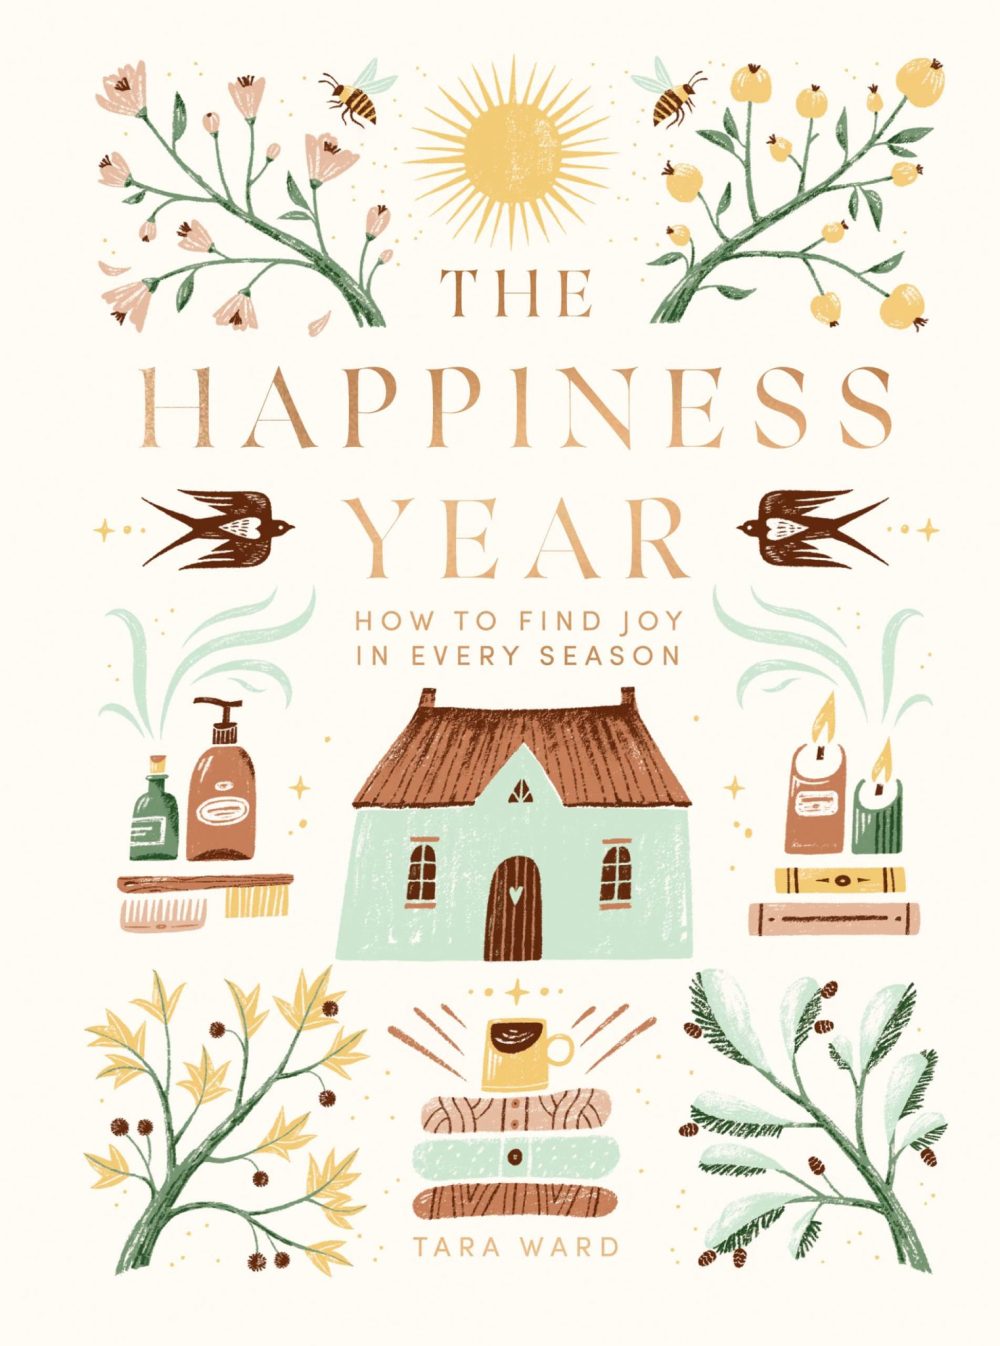 The Happiness Year: How to Find Joy in Every Season